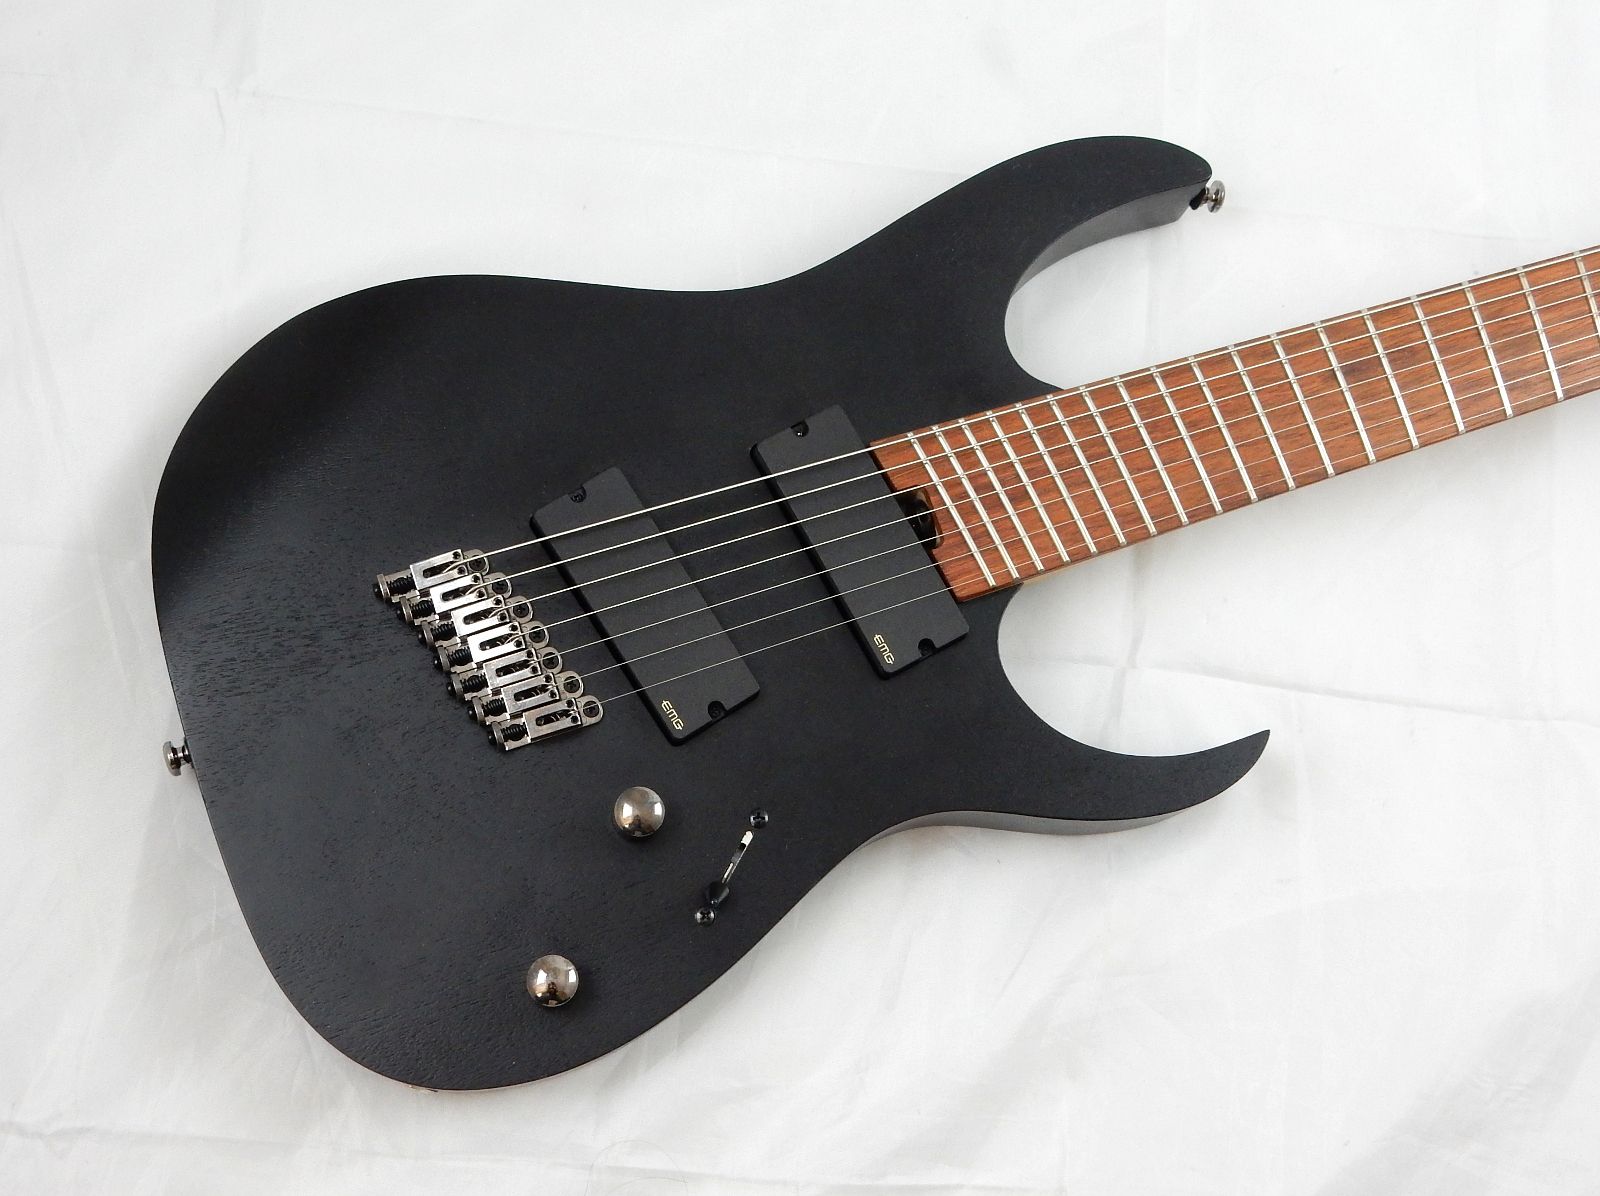 IBANEZ RG Iron Multi-Scale Fanned Fret 7-String - EMG 808 Pickups! for Sale in OR - OfferUp